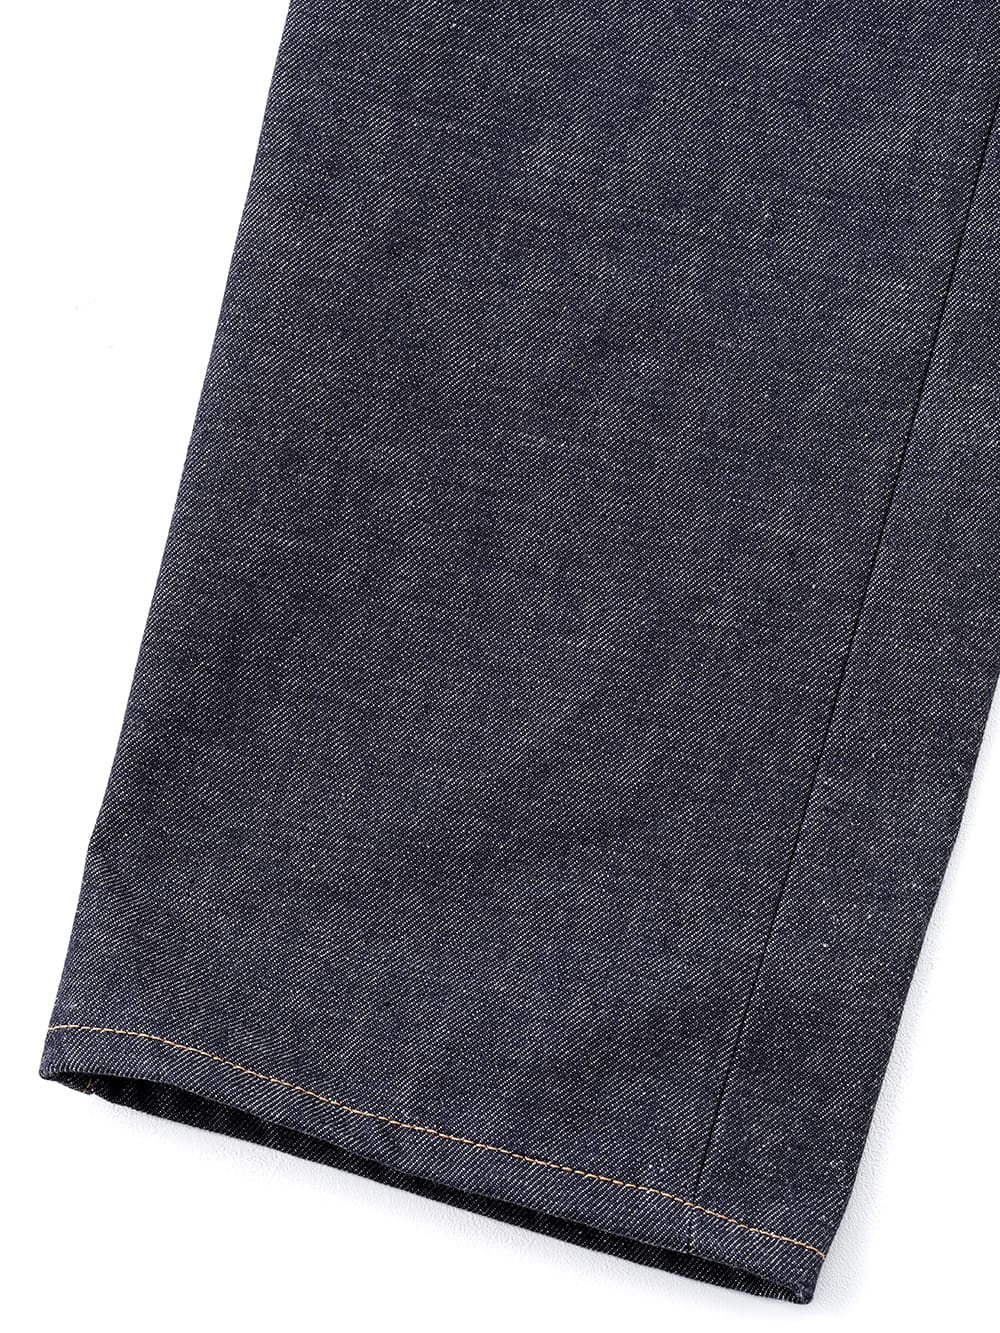 two-way slim tapered 6-pocket jean